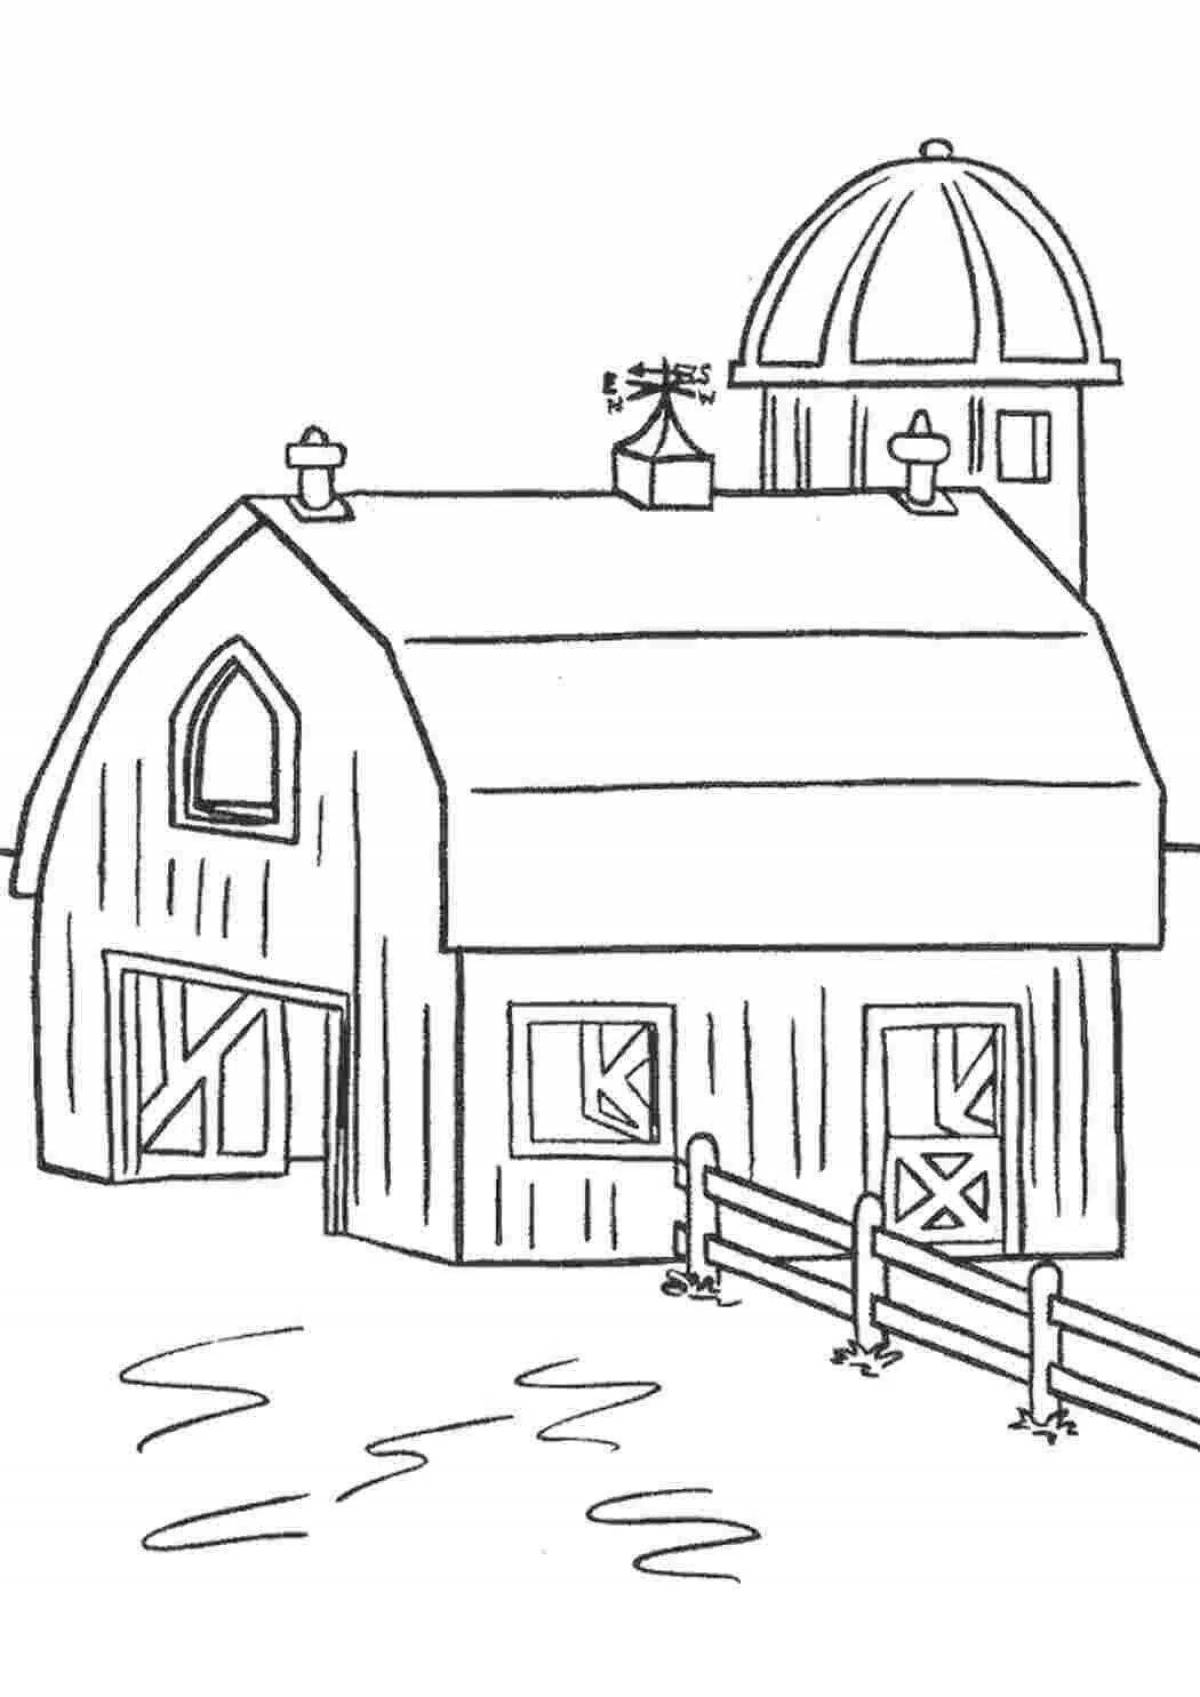 Coloring cute animal house